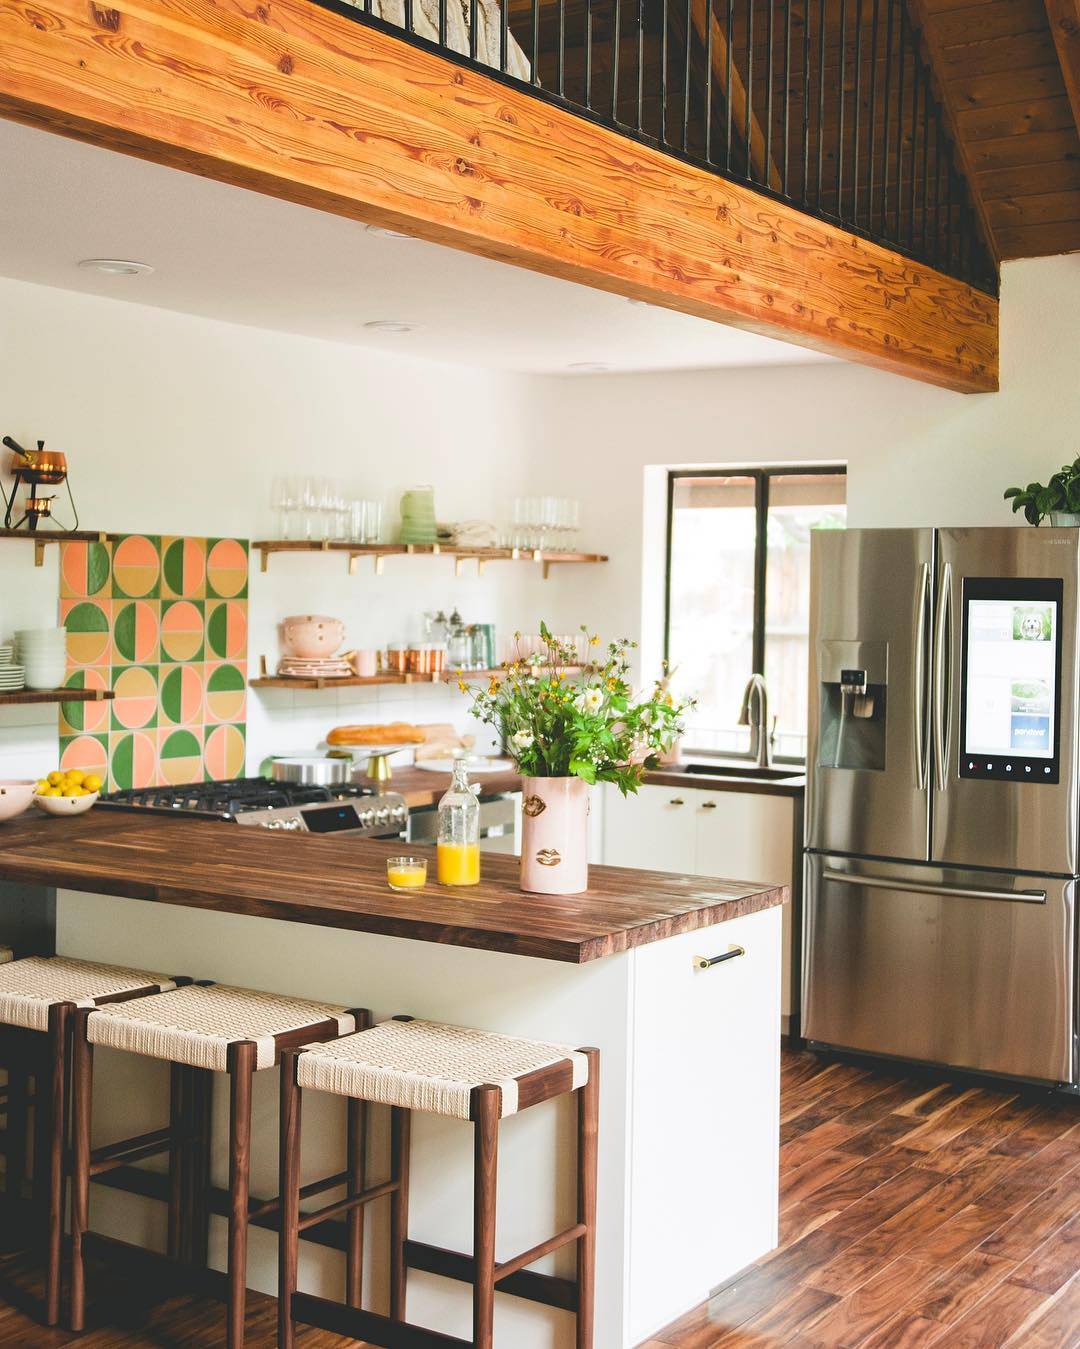 A kitchen with wooden floors and a stainless steel refrigerator, showcasing retro pink and green tiles.